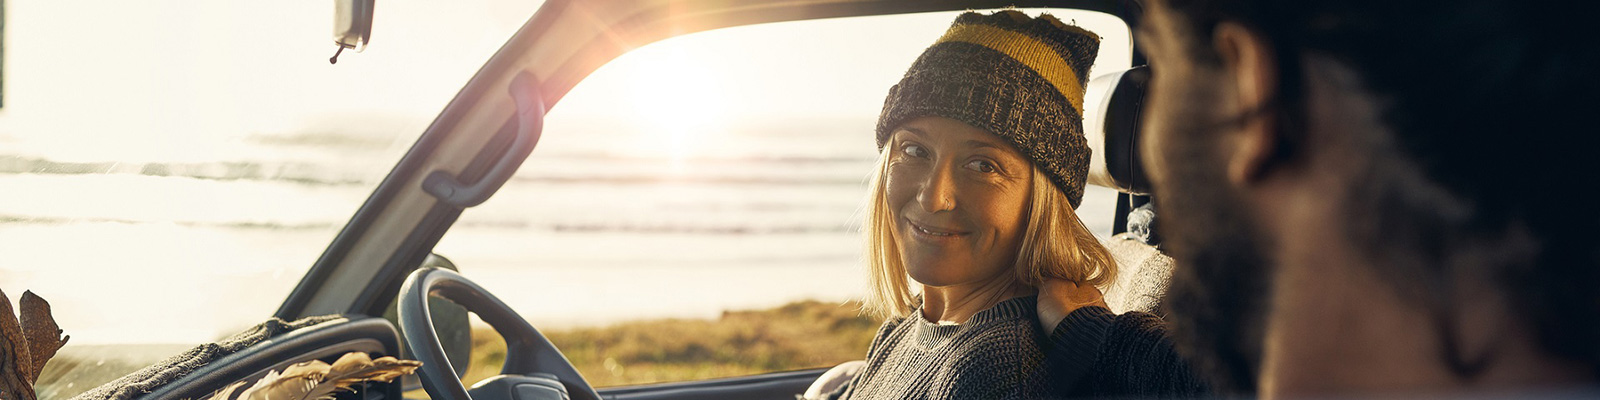 smiling woman and man in parked car by beach